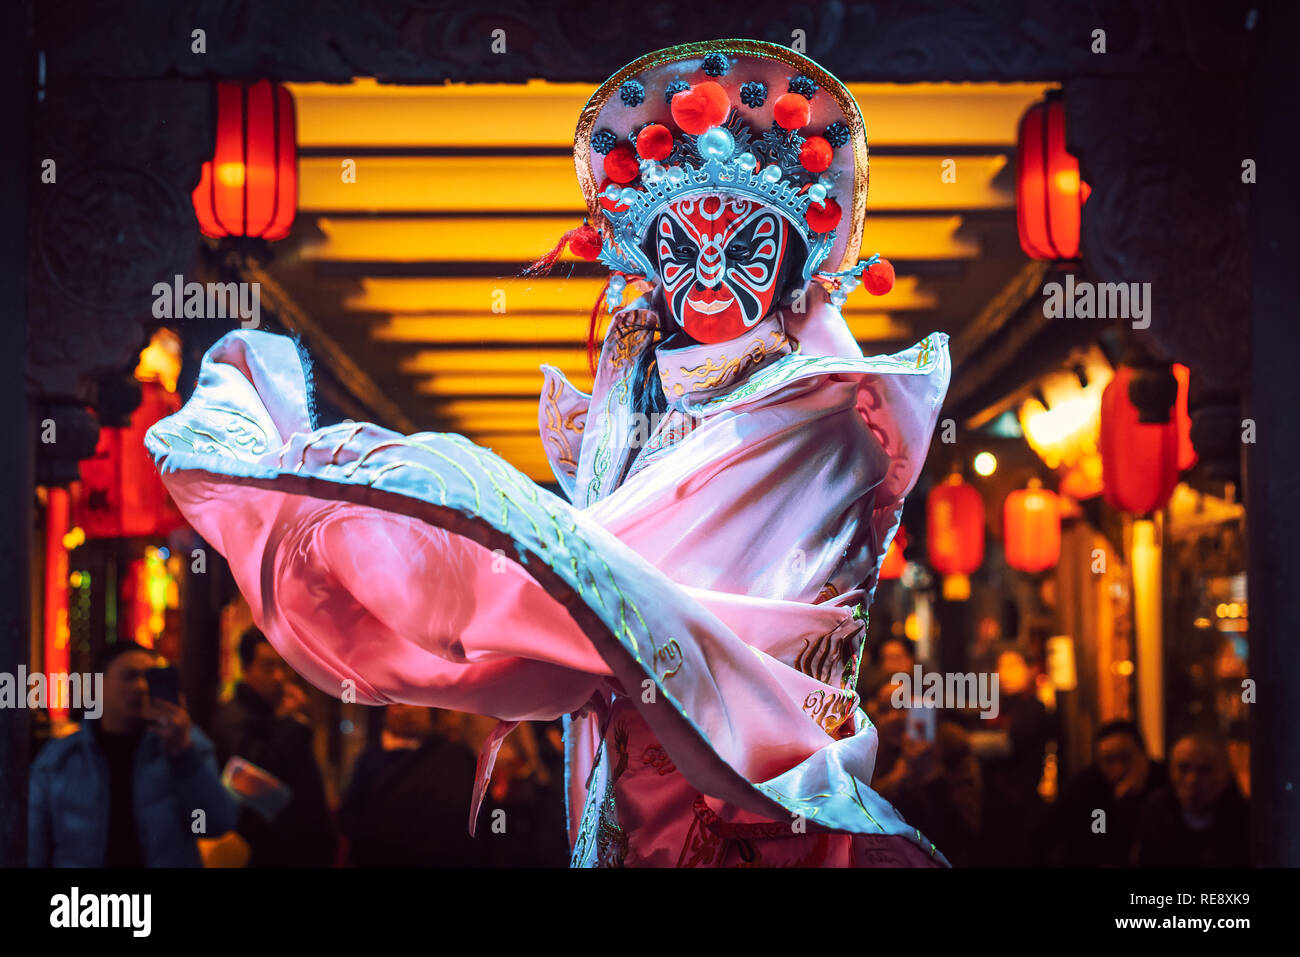 Chengdu, Sichuan Province, China - Jan 19, 2019: Chinese actress performs a public traditional face-changing art or bianlian onstage at Chunxifang Chunxilu covered street. Stock Photo